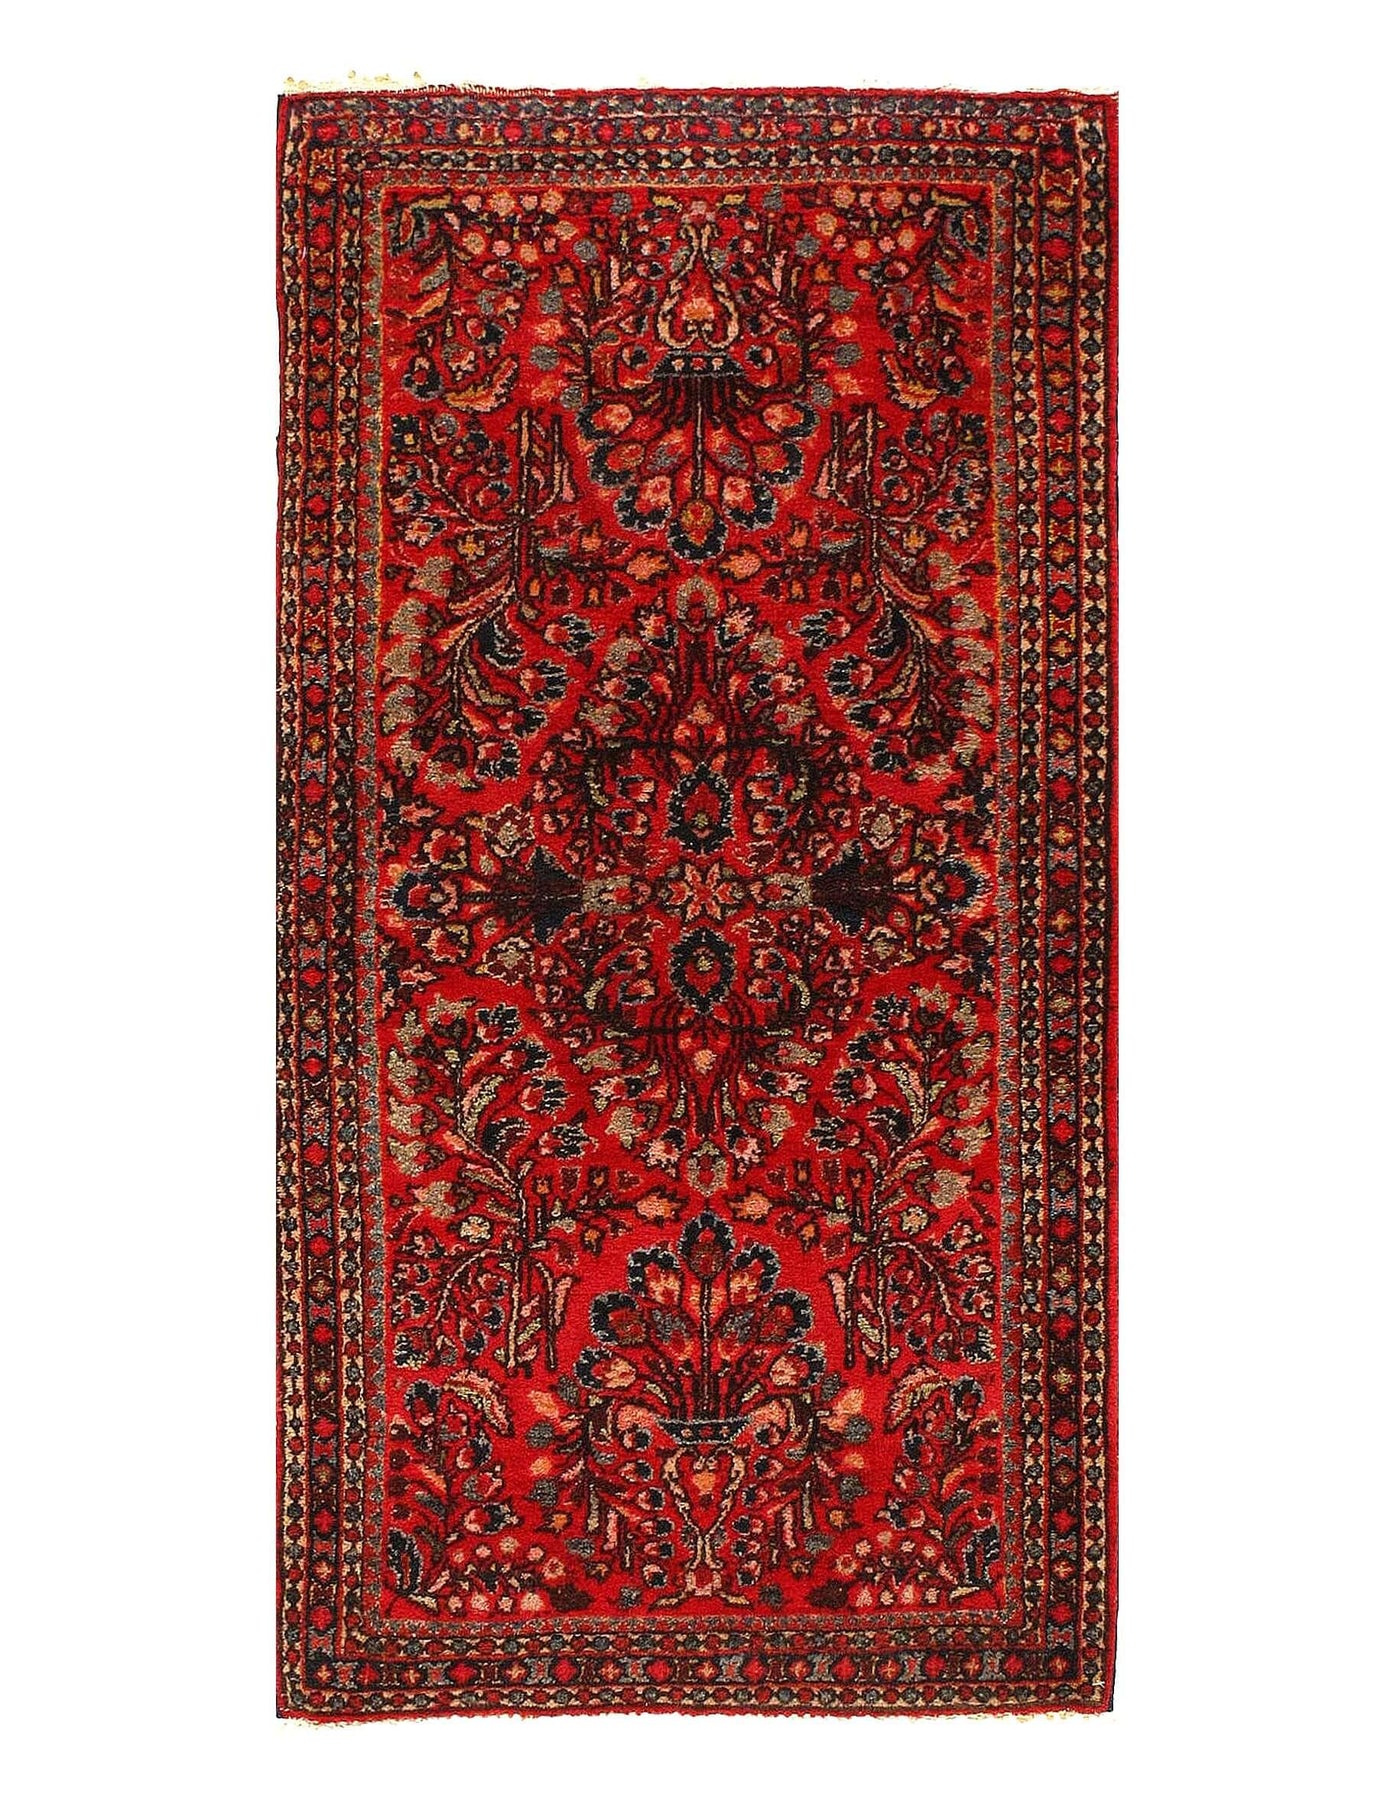 Red Vintage Rug | 1920s Persian Sarouk Red Vintage Rugs | Canvello